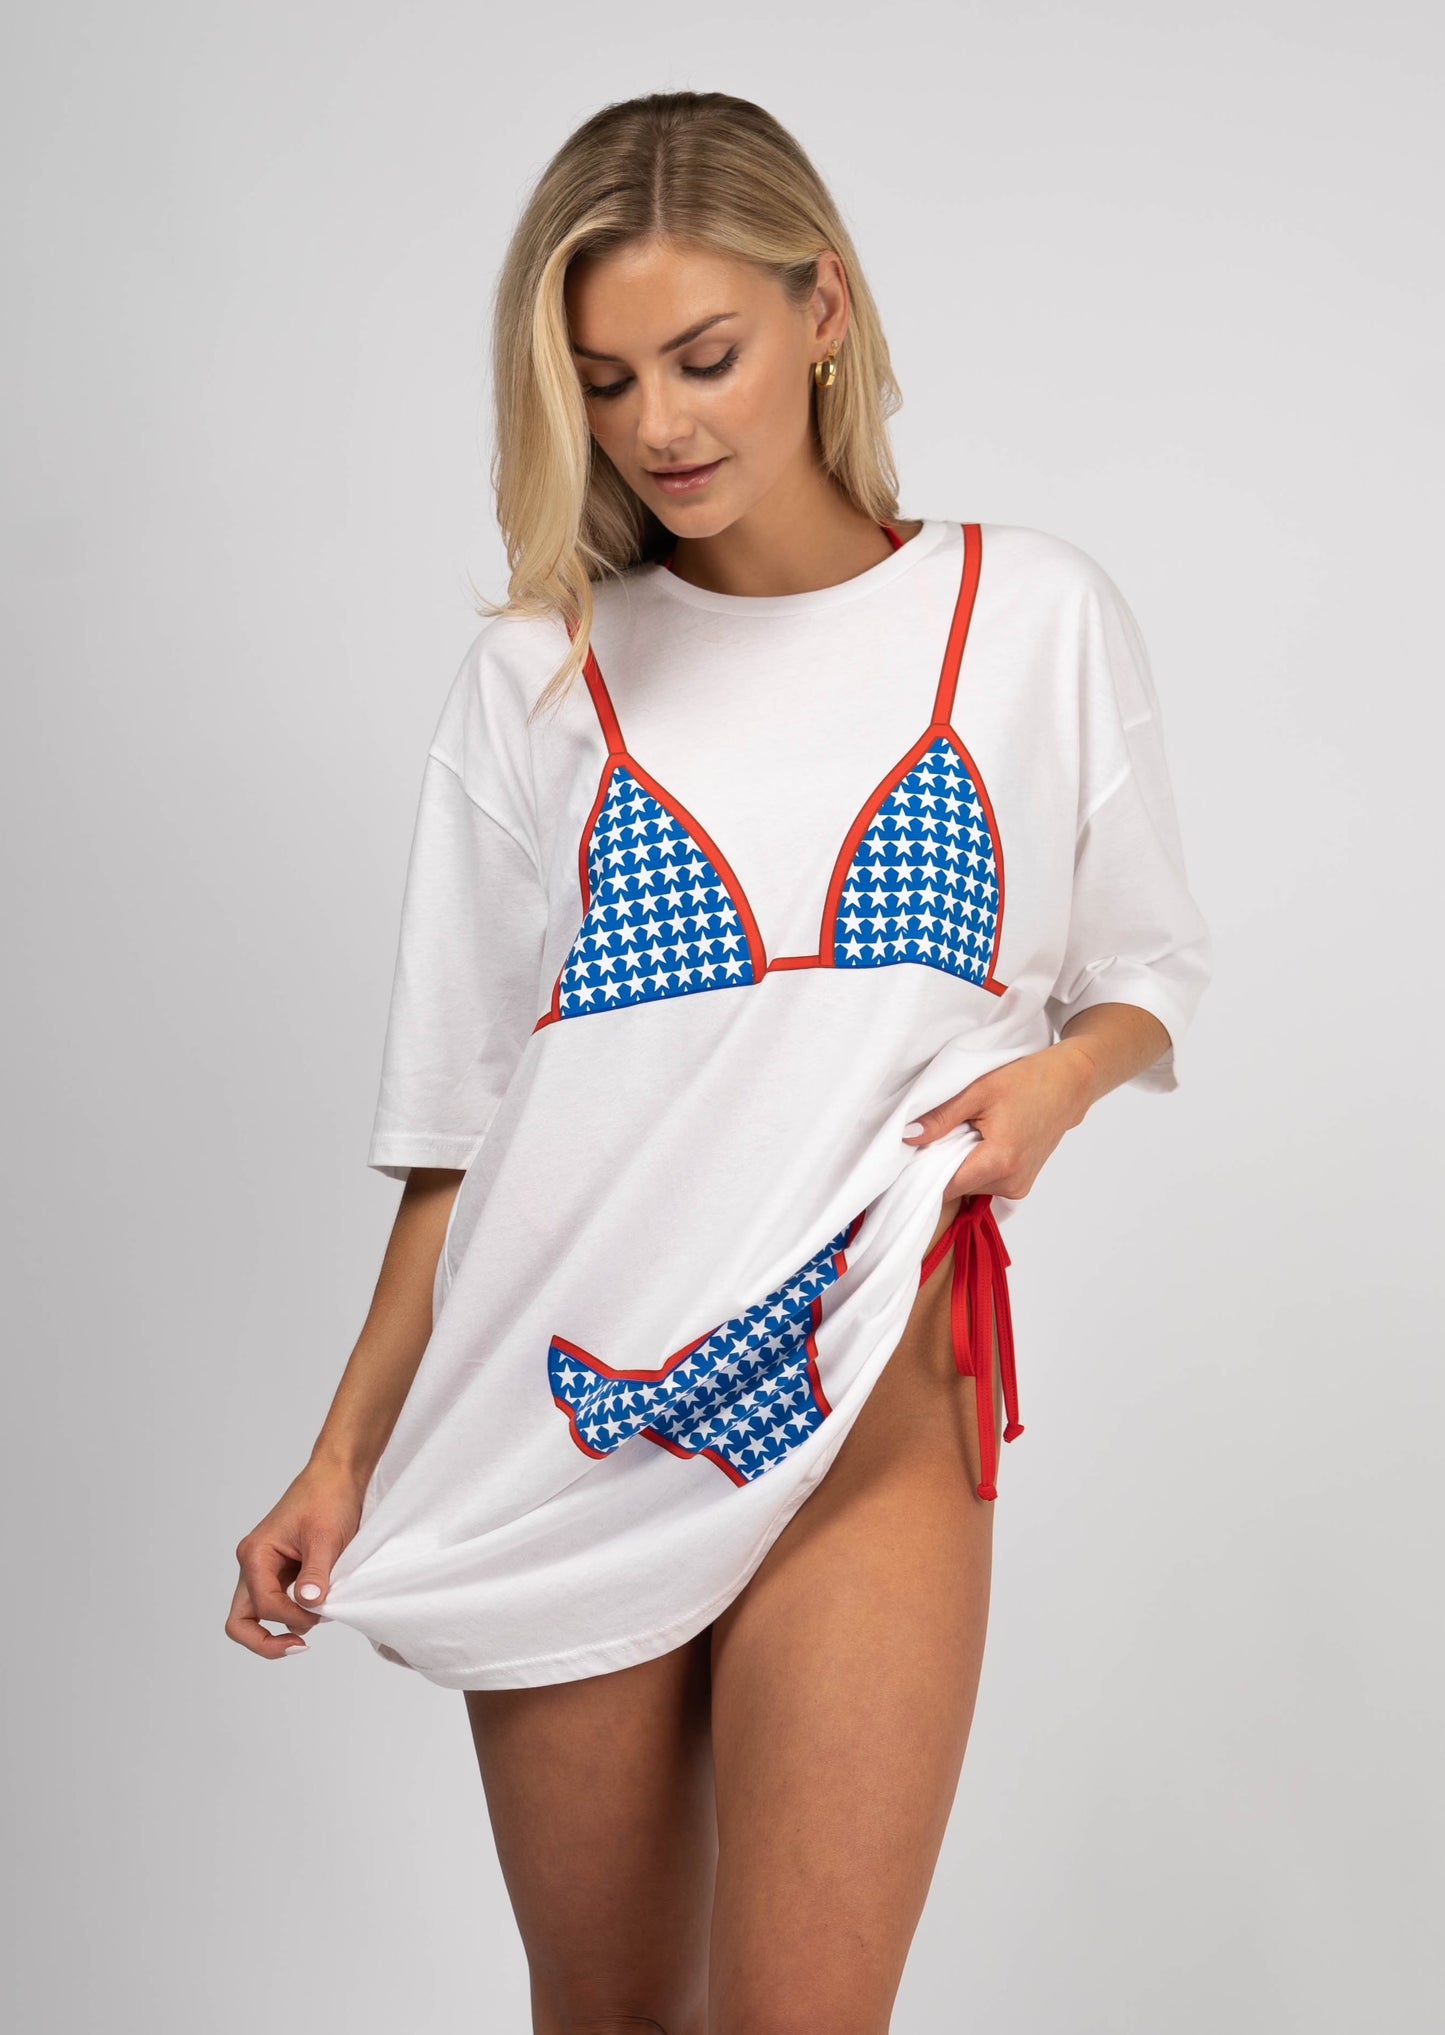 star print bikini graphic t shirt dress -funny bikini silhouette oversized t shirt - 4th of July graphic tee - fun beach cover up - 4th of July outfit inspo